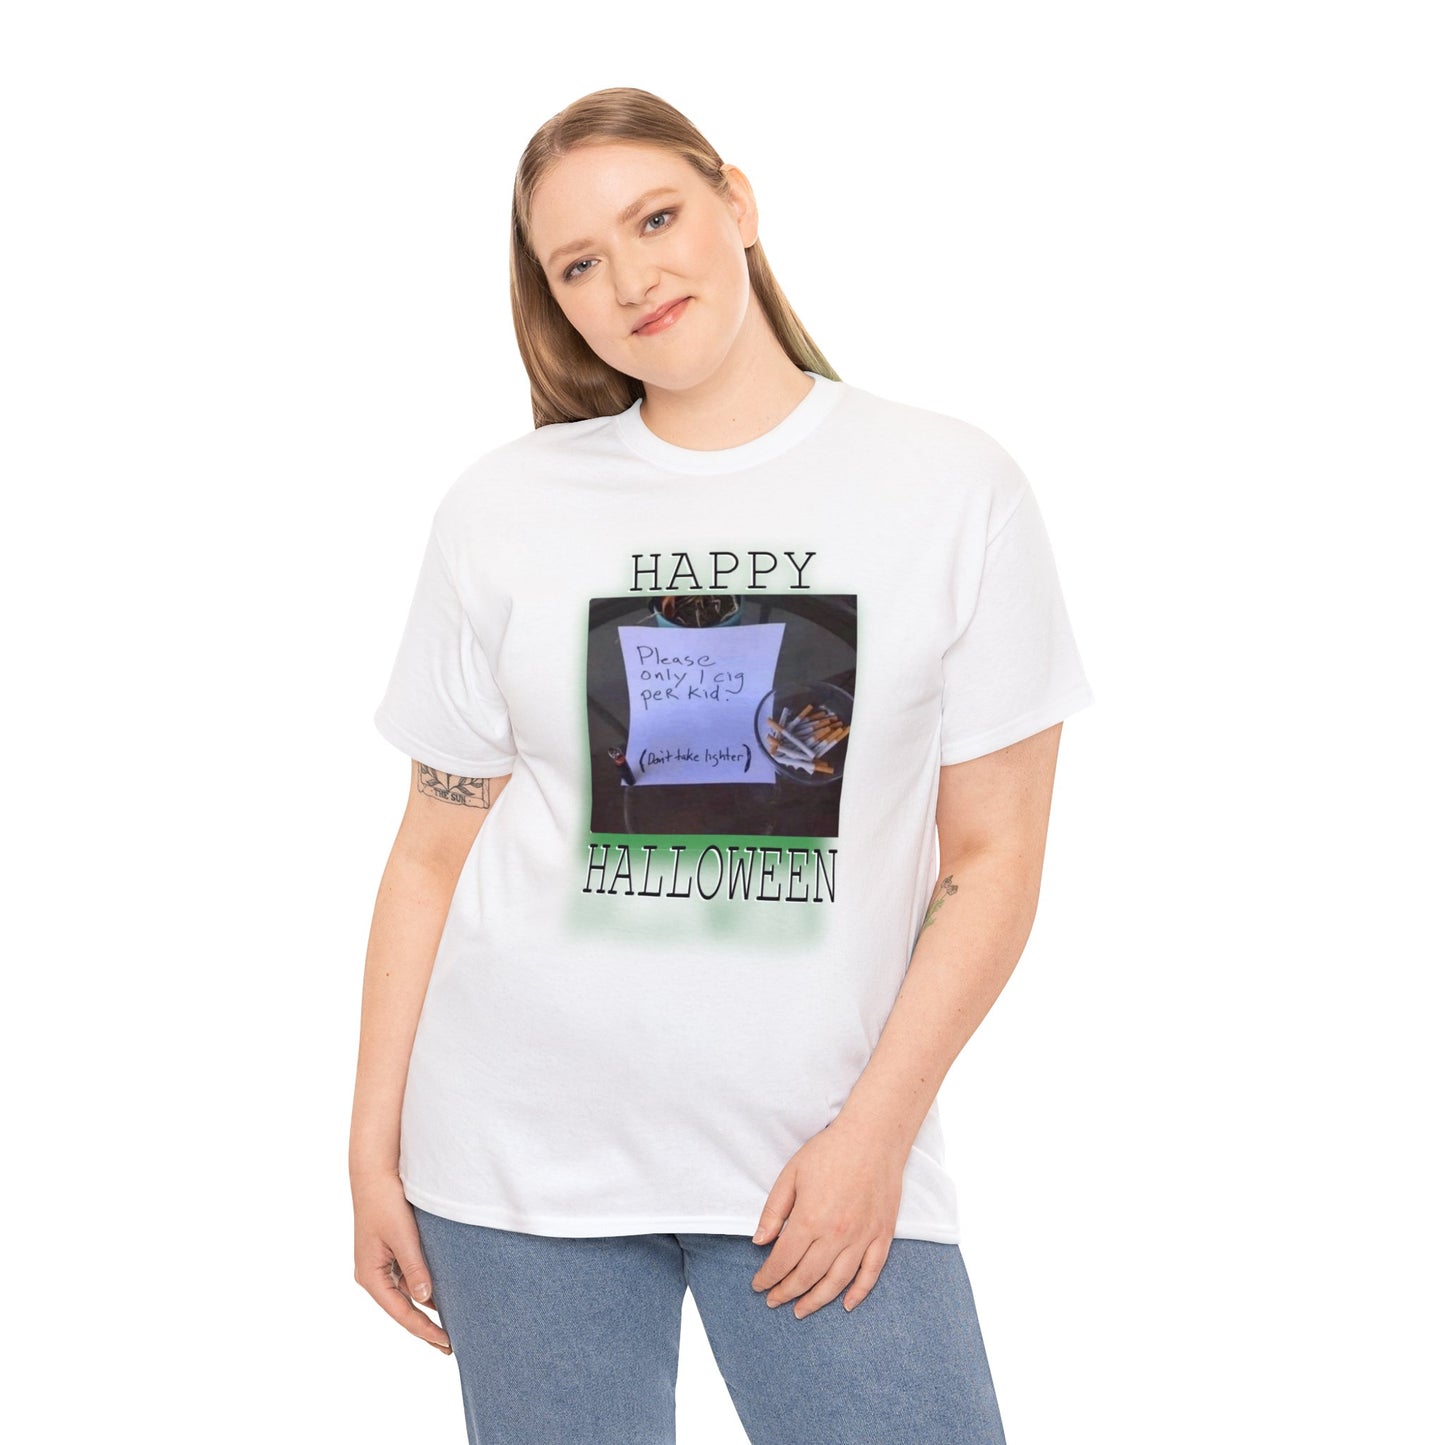 Happy Halloween - Hurts Shirts Collection